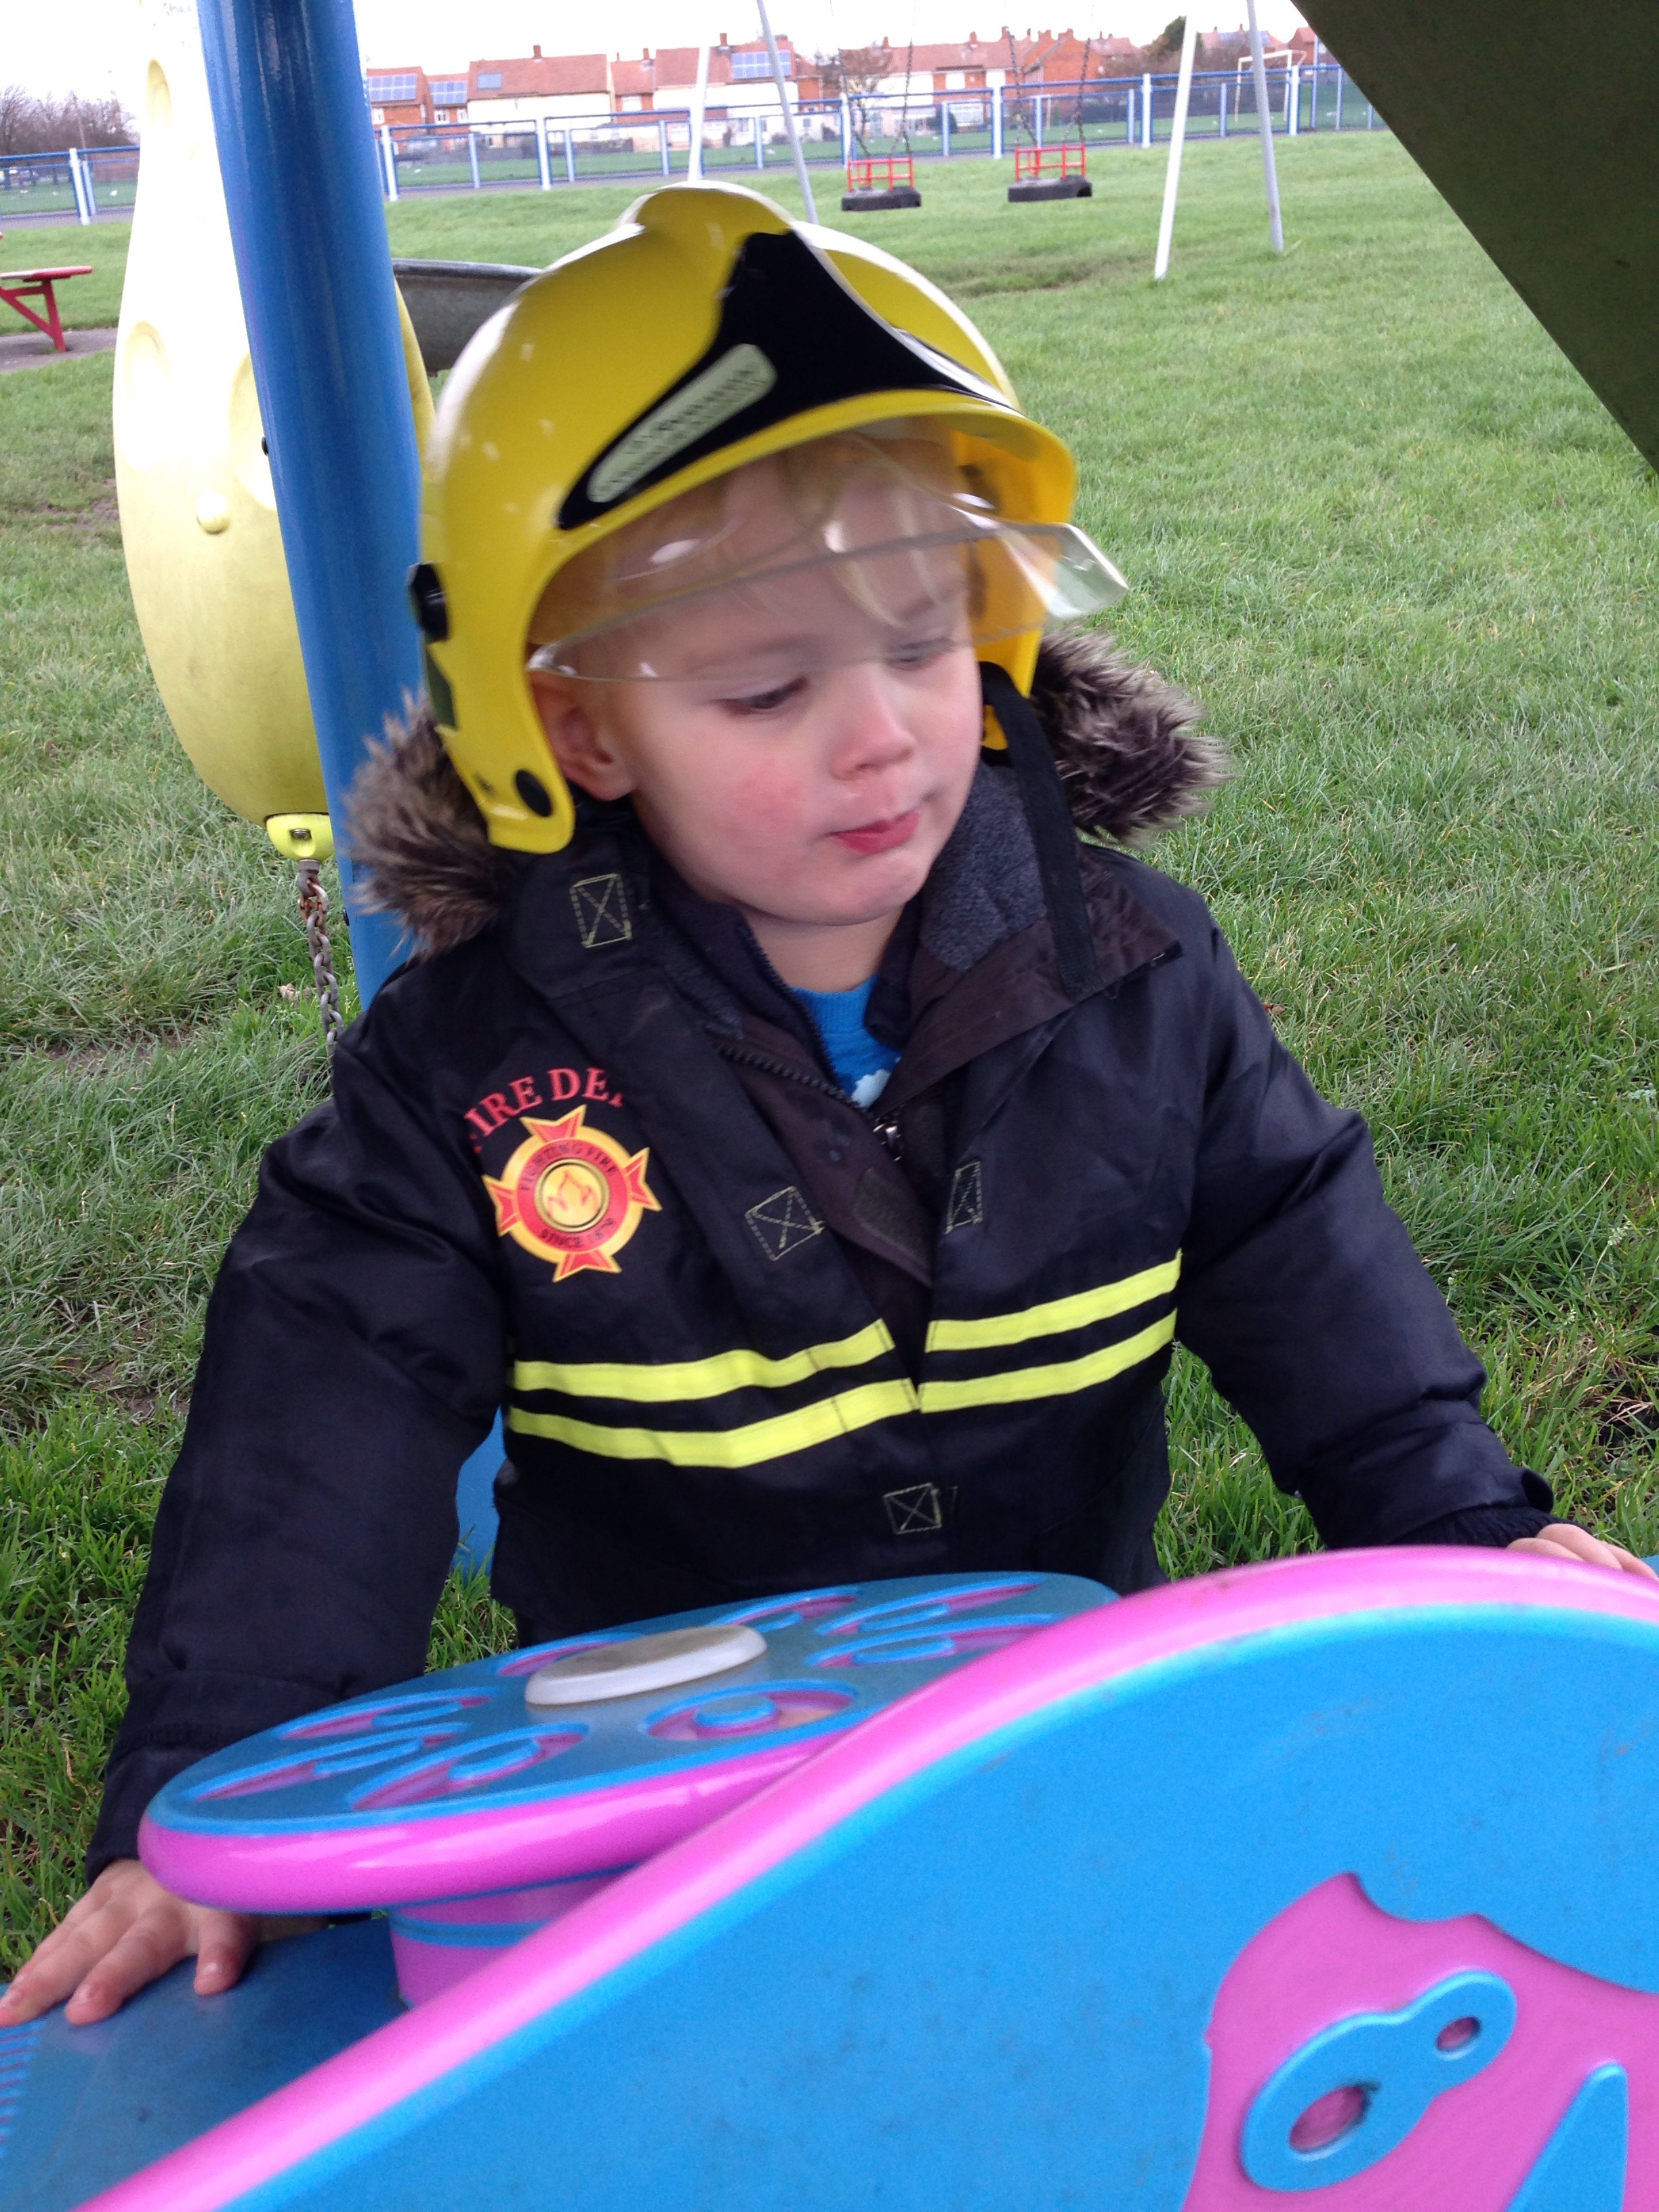 checking out his next mission as a fire fighter